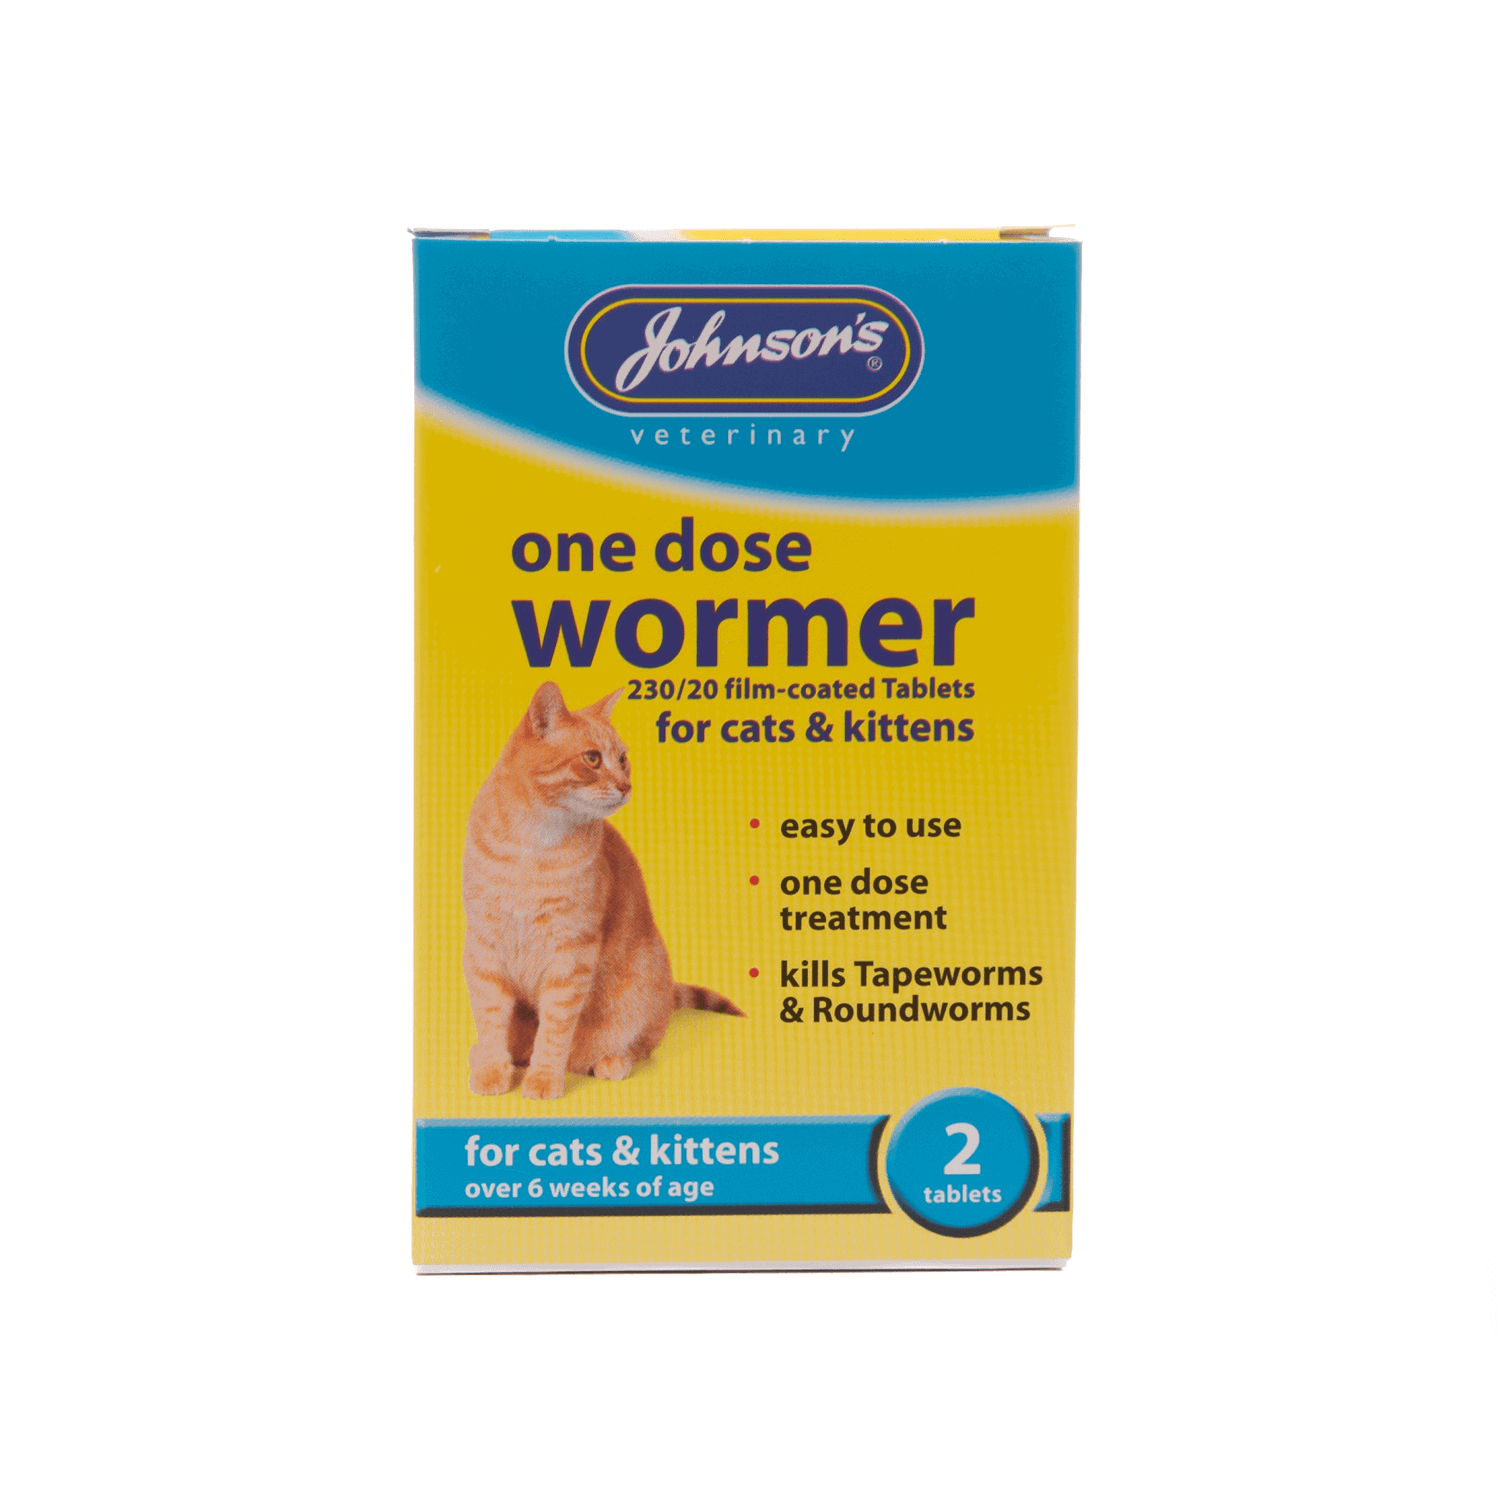 Johnson's one dose wormer